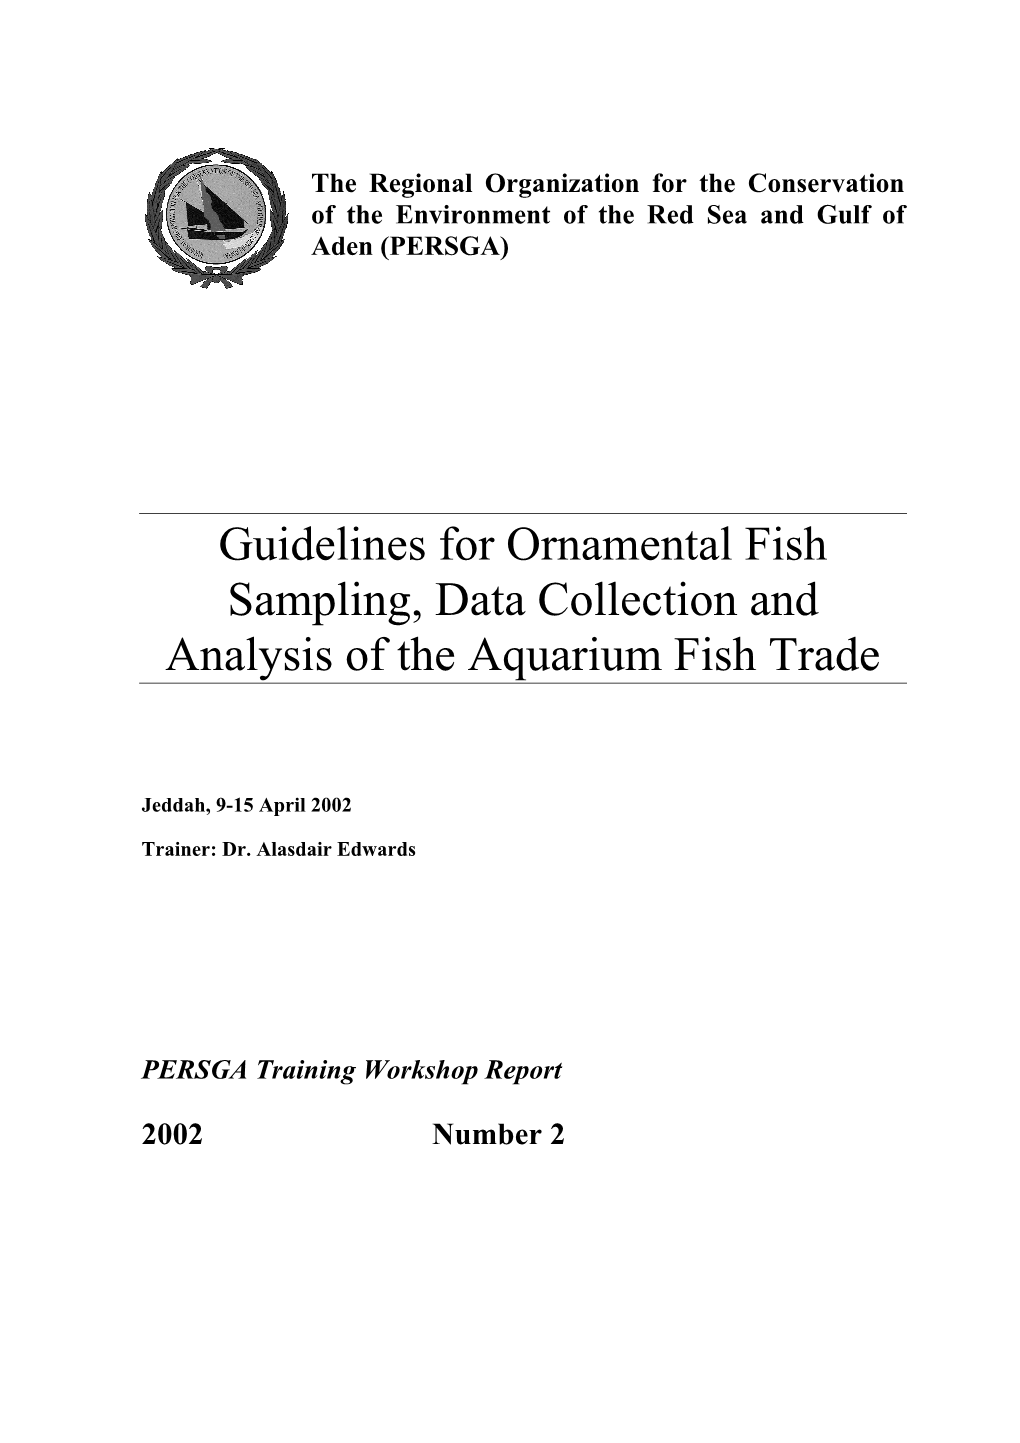 Guidelines for Ornamental Fish Sampling, Data Collection and Analysis of the Aquarium Fish Trade